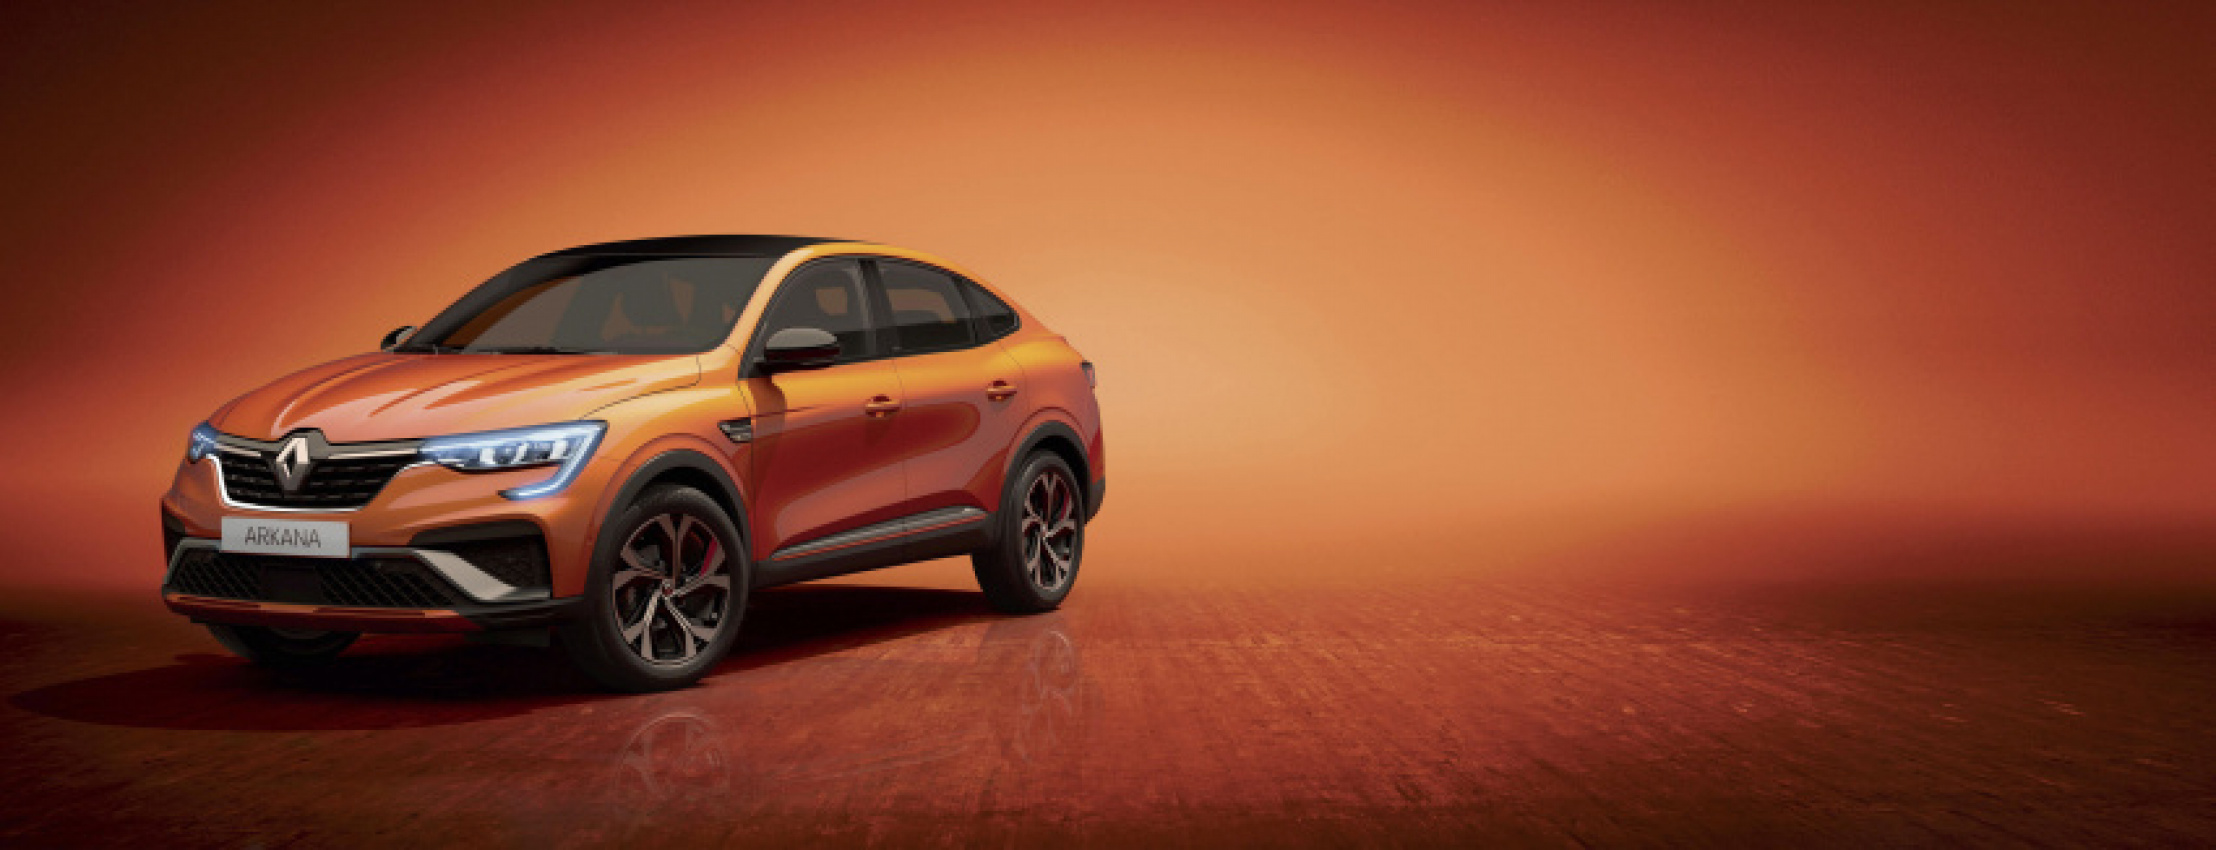 autos, cars, renault, android, android, all-new arkana coupe-suv set to bolster renault’s model range in uk